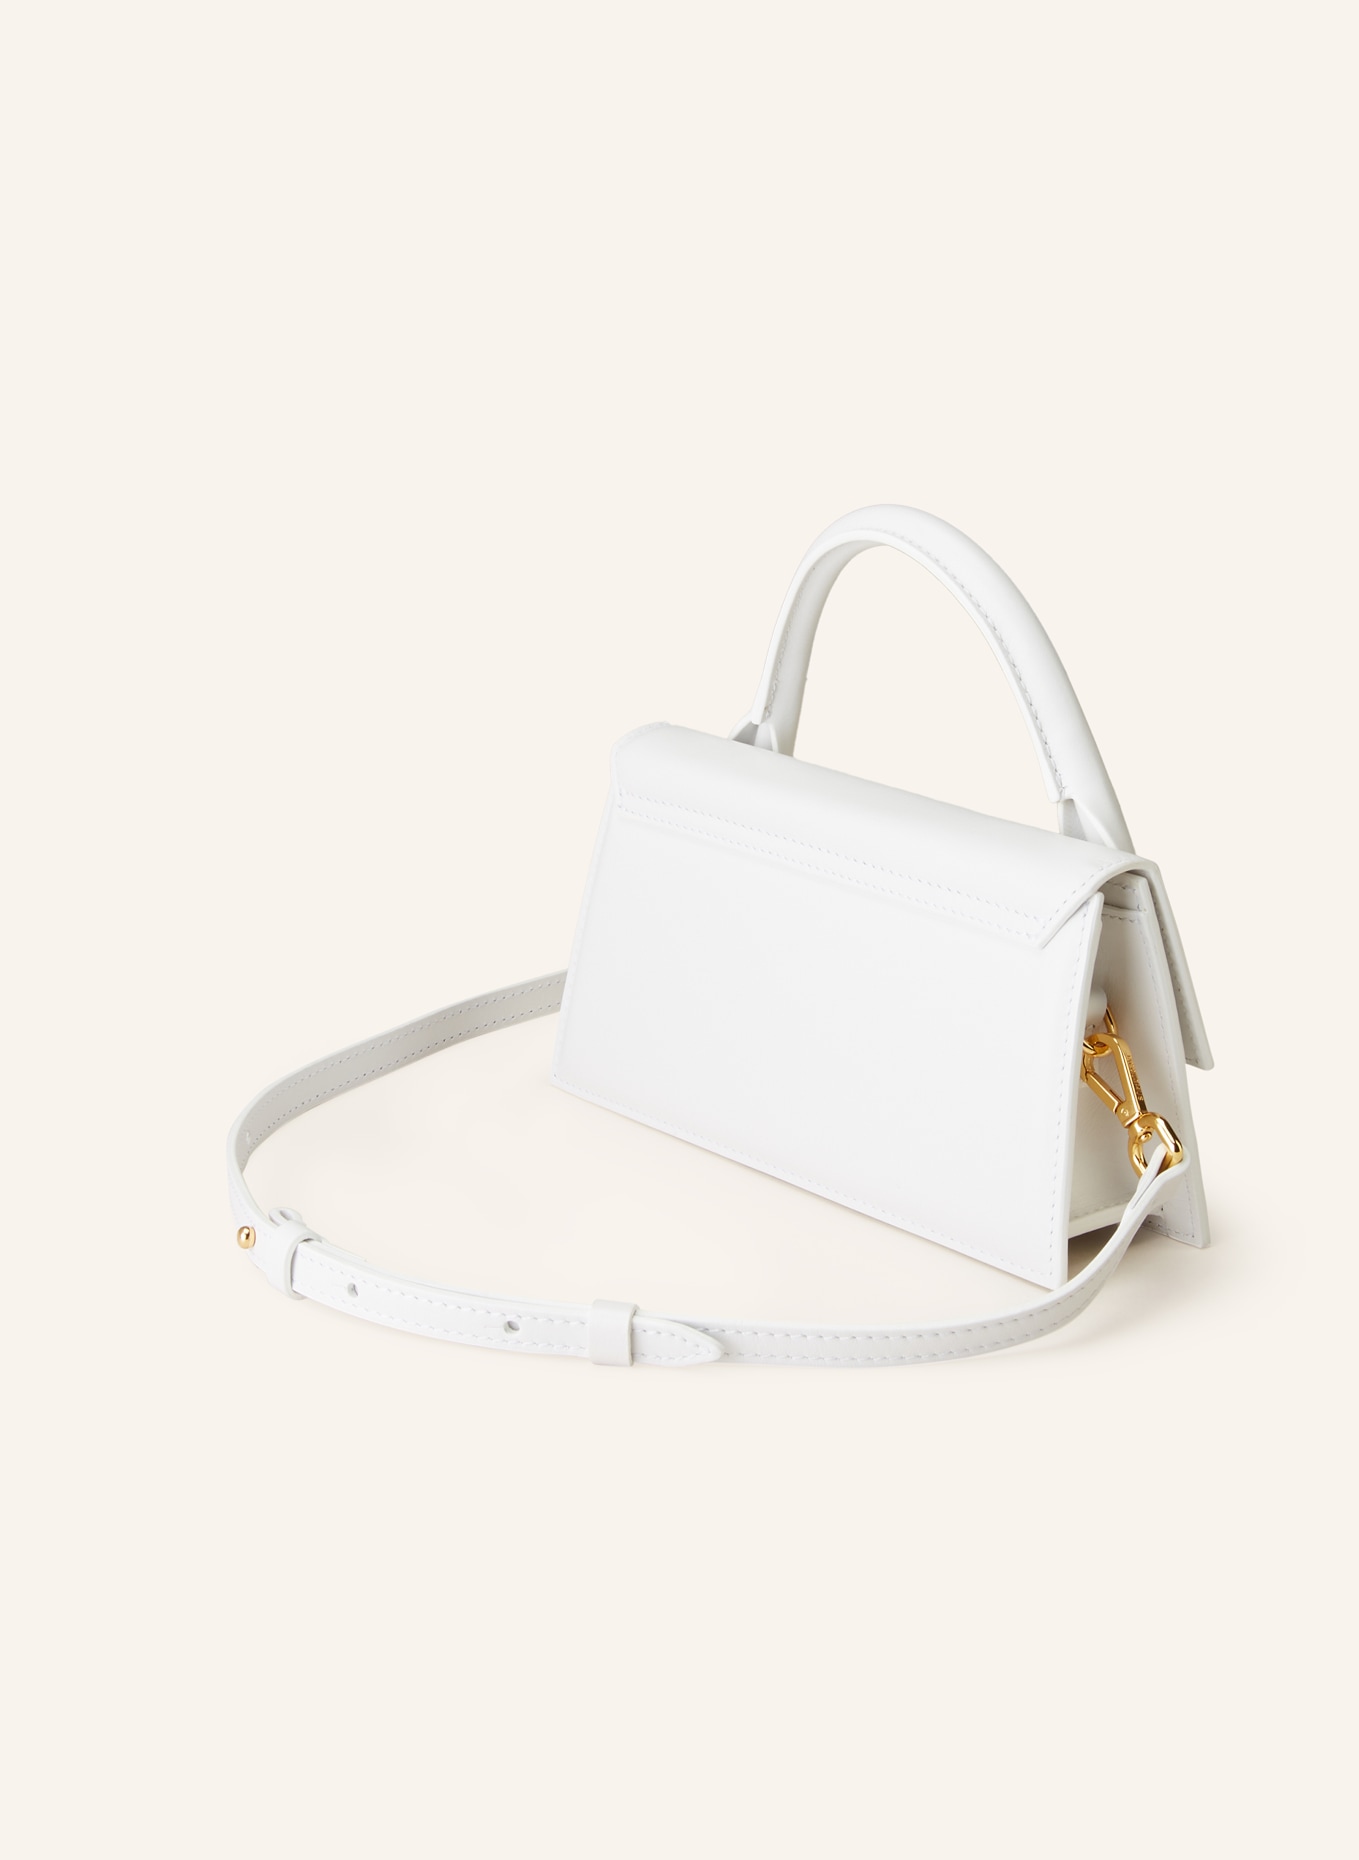 JACQUEMUS Handtasche LE CHIQUITO LONG , Farbe: WEISS (Bild 2)